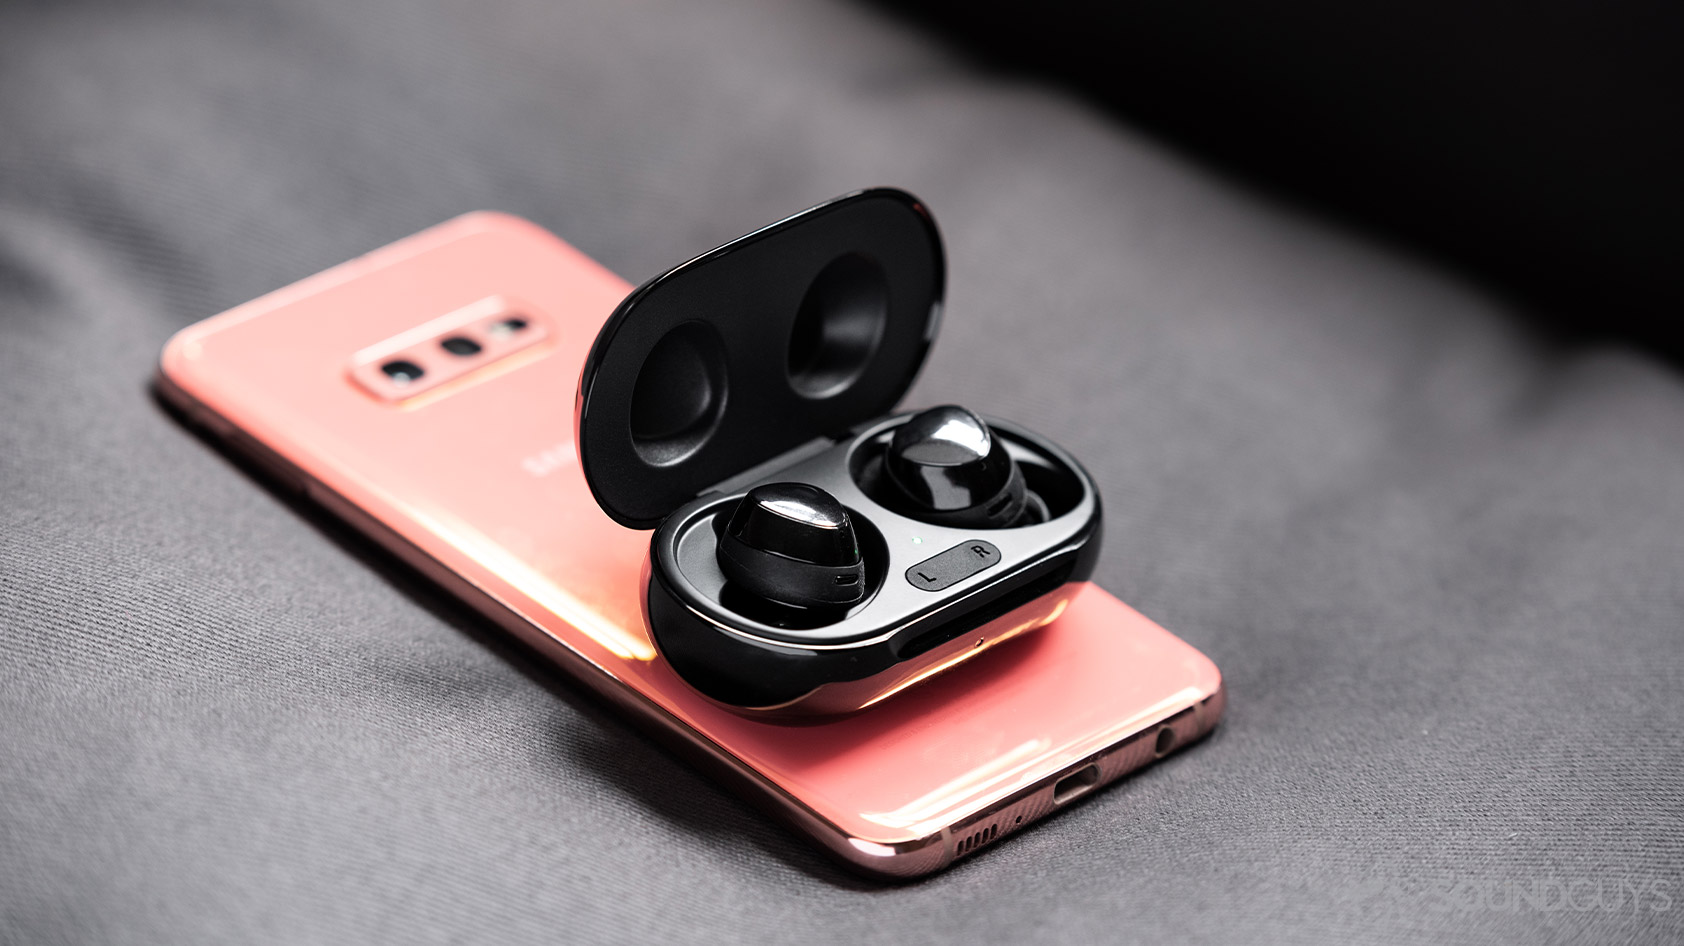 The Samsung Galaxy Buds Plus true wireless earbuds on top of a Samsung Galaxy S10e smartphone in flamingo pink.